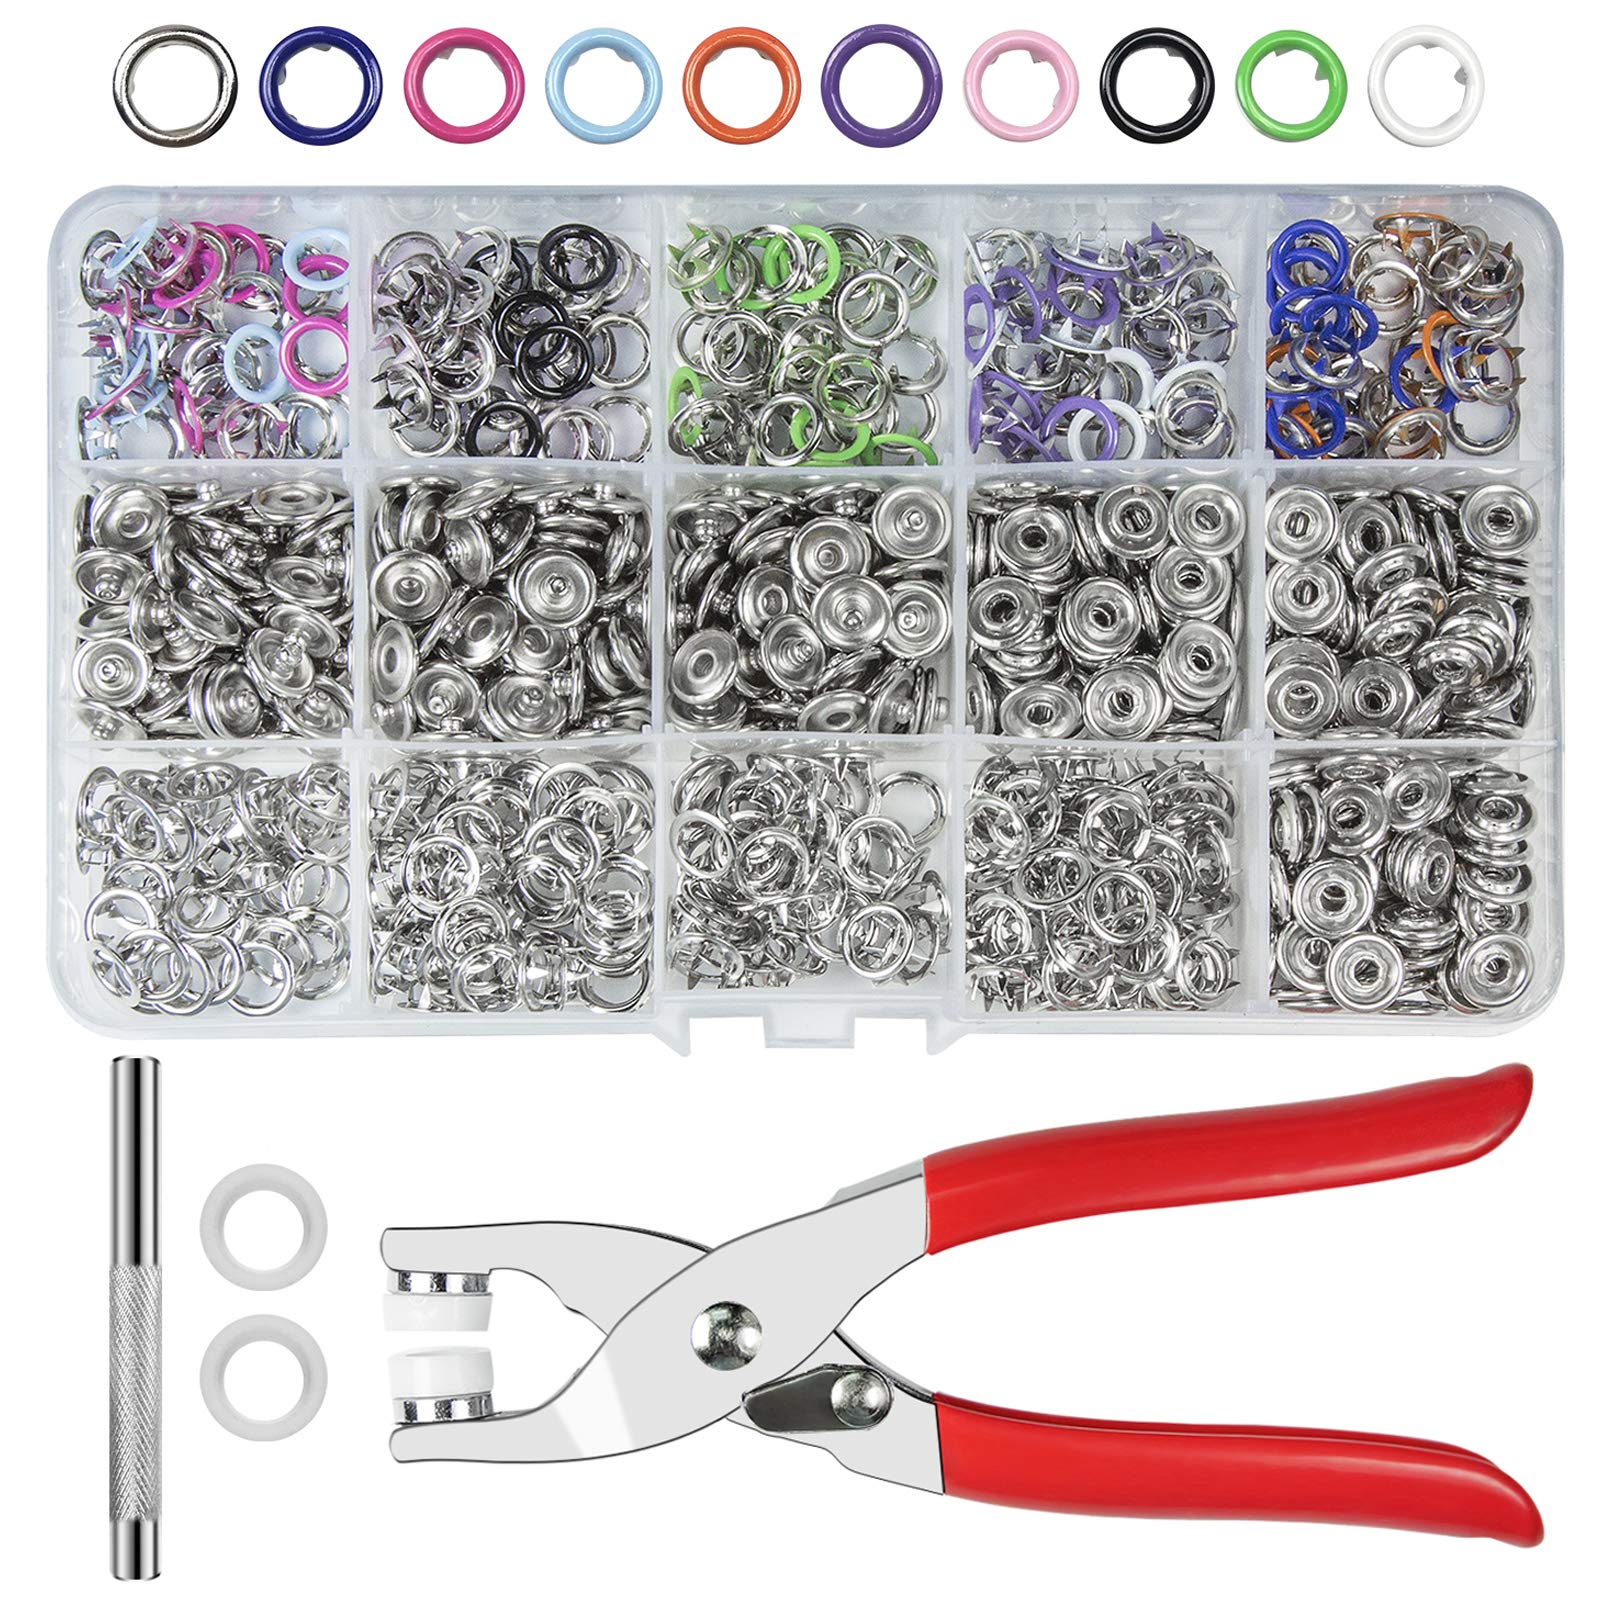 🔥Summer Hot Sale Now-30% Off- Metal Snaps Buttons with Fastener Pliers Press Tool Kit